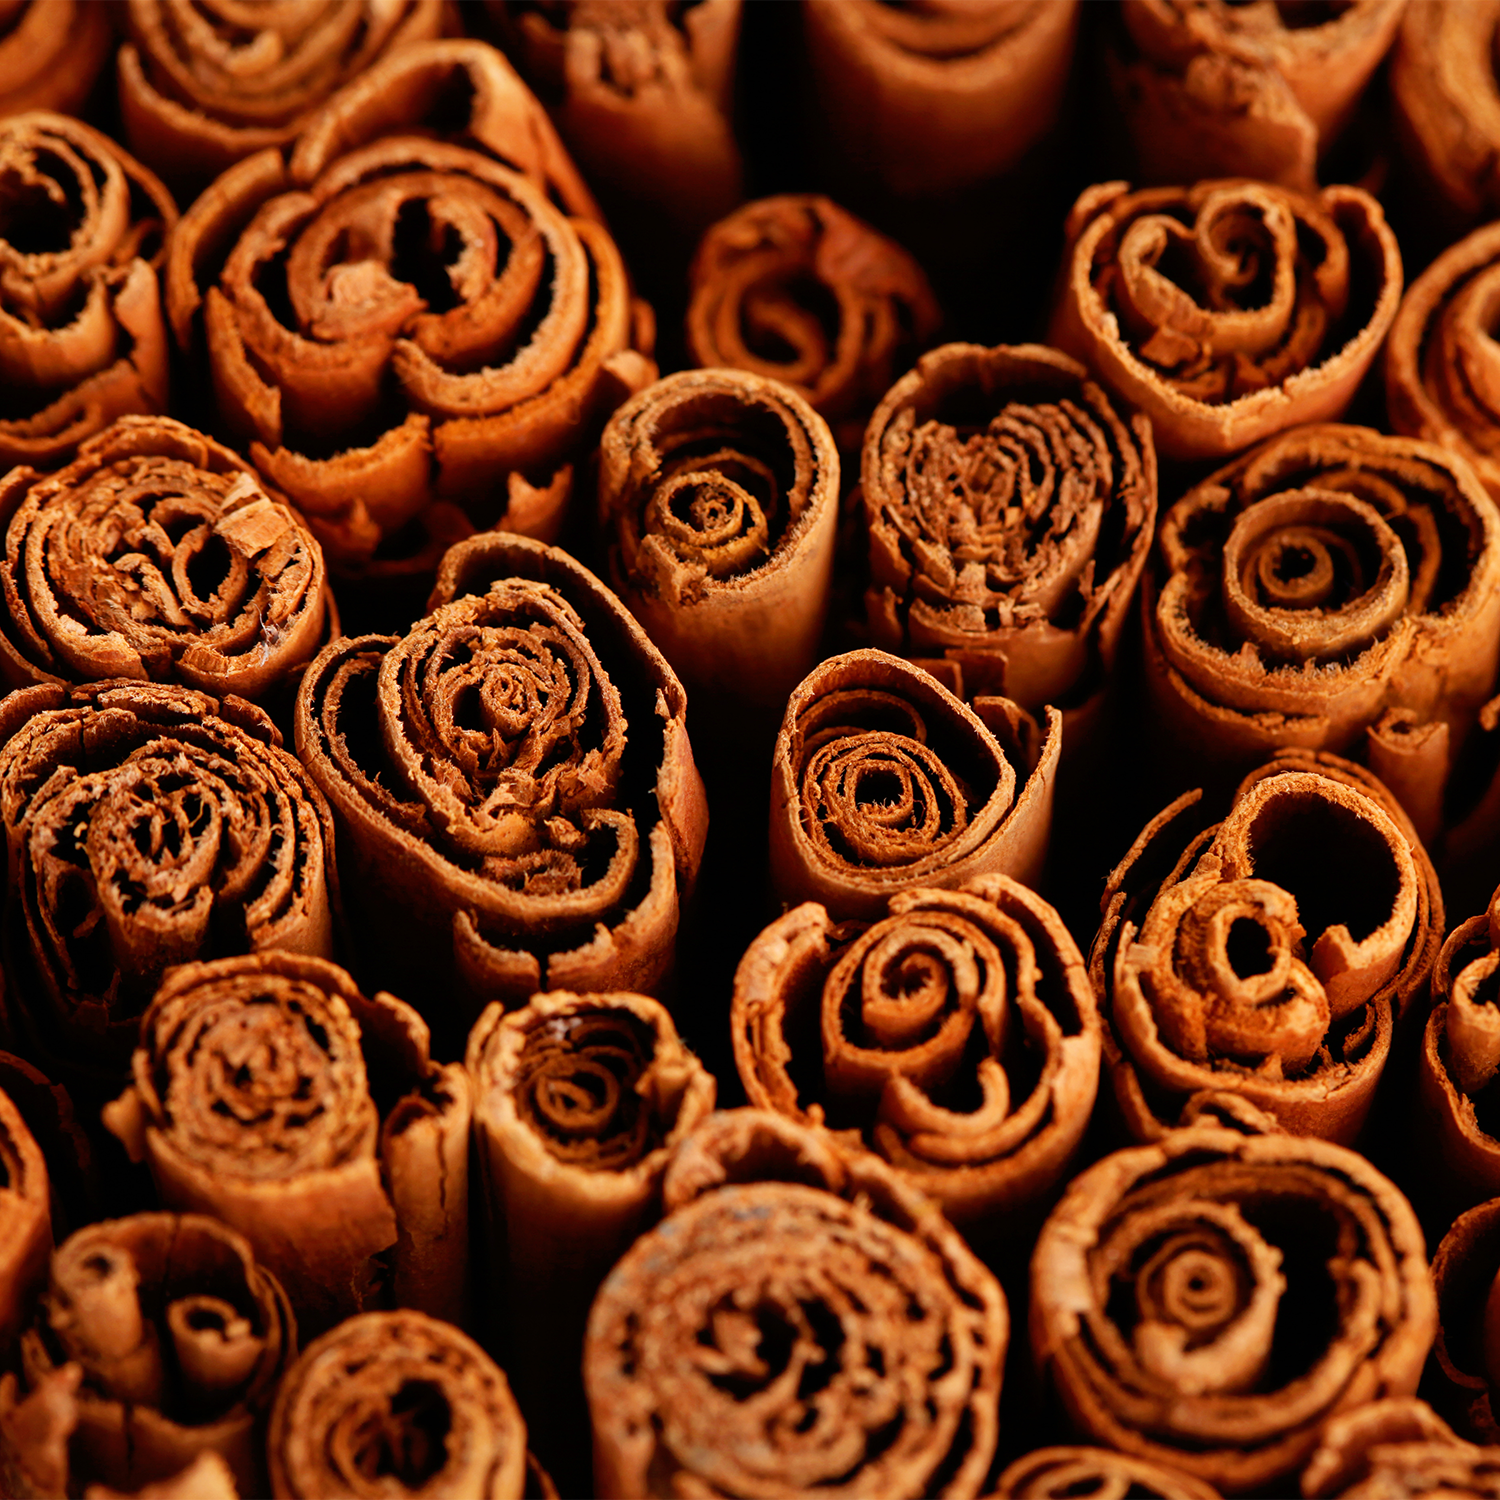 A close up photo of a bundle of cinnamon sticks. These spices represent the cinnamon in Tuscany Candle's "Cinnamon" scented candle